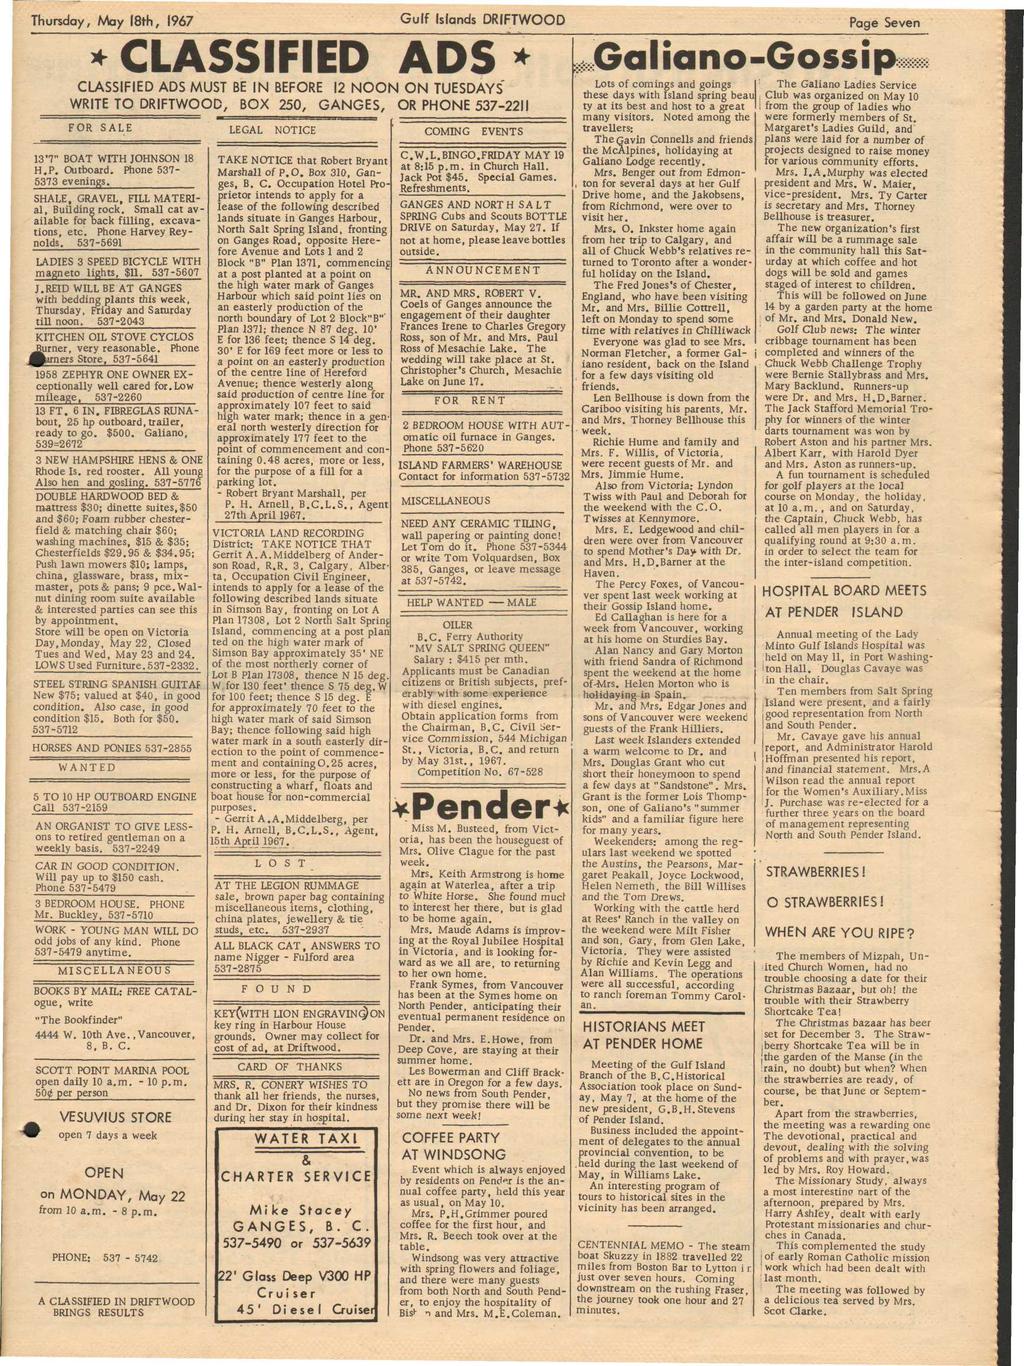 Thursday, May 18th, 1967 Gulf Islands DRIFTWOOD Page Seven * CLASSIFIED ADS* CLASSIFIED ADS MUST BE IN BEFORE 12 NOON ON TUESDAYS" WRITE TO DRIFTWOOD, BOX 250, GANGES, OR PHONE 537-2211 FOR SALE